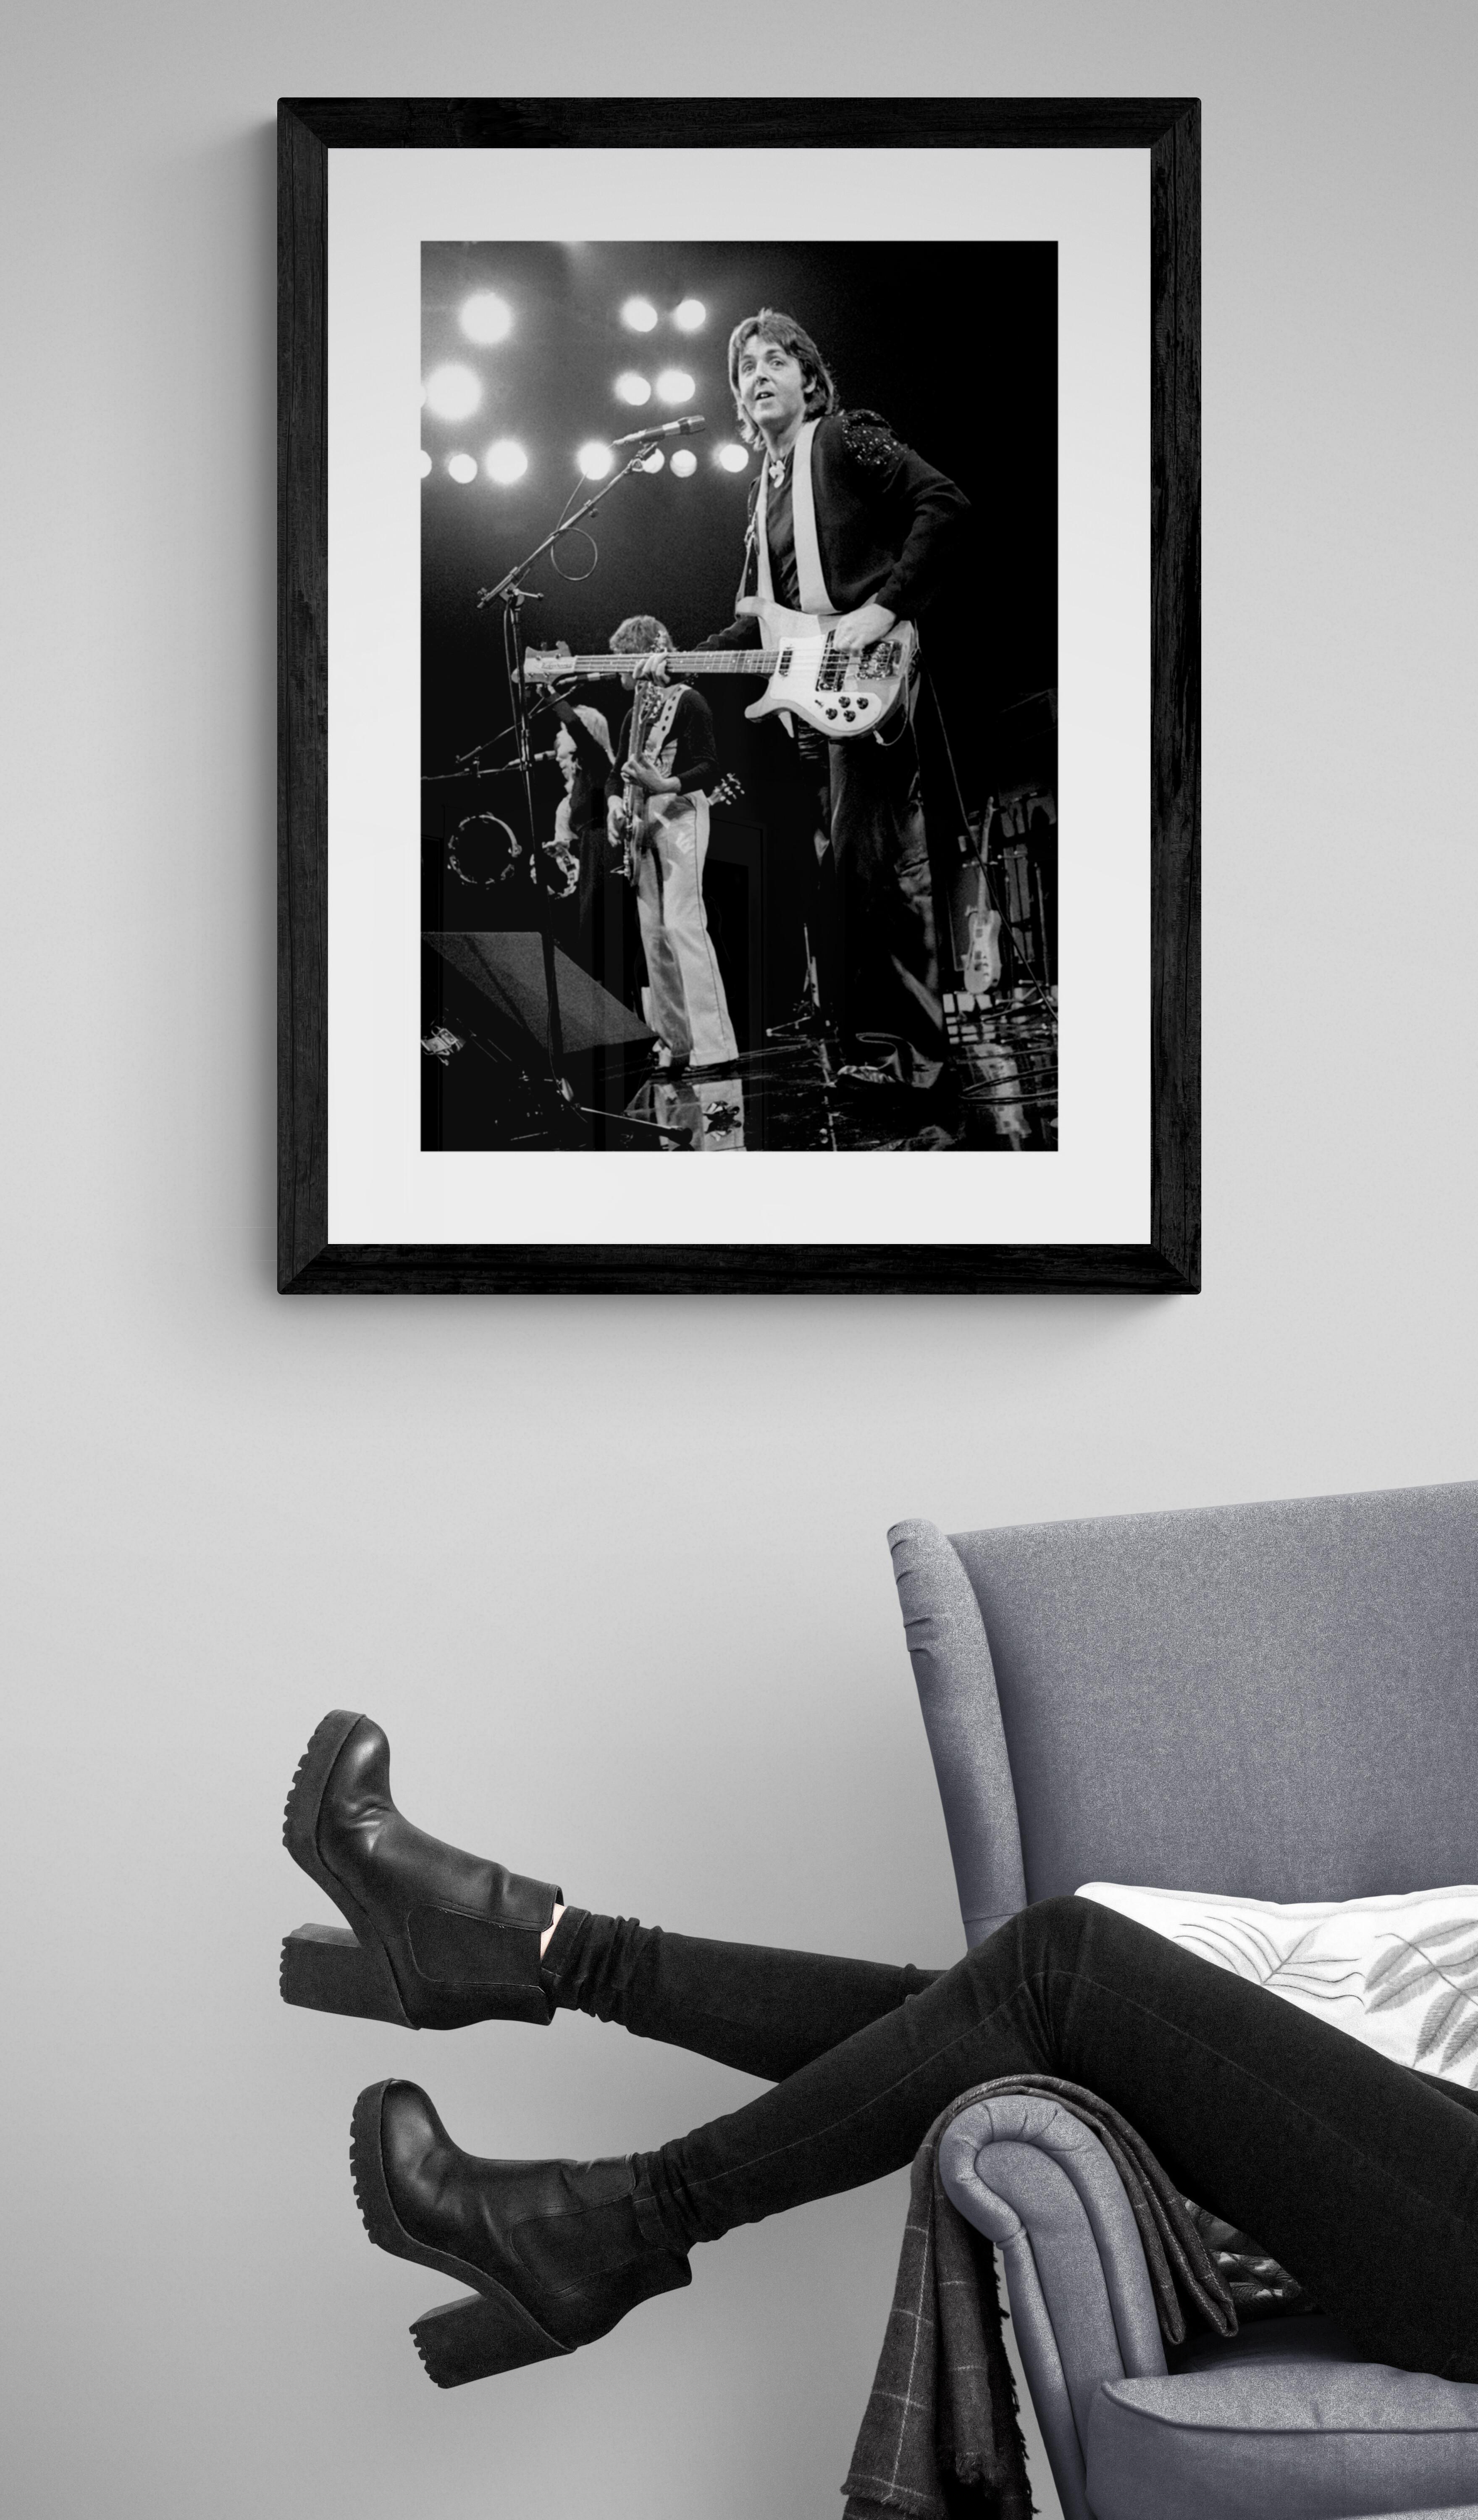 Title: Paul McCartney #2 Concert Photo
Artist: Richard E. Aaron
Estate Edition: Hand numbered with estate chop mark in the margin, signature stamp on verso, archival pigment print on Hahnemühle Photo Rag Pearl, 100% cotton paper fine art paper.